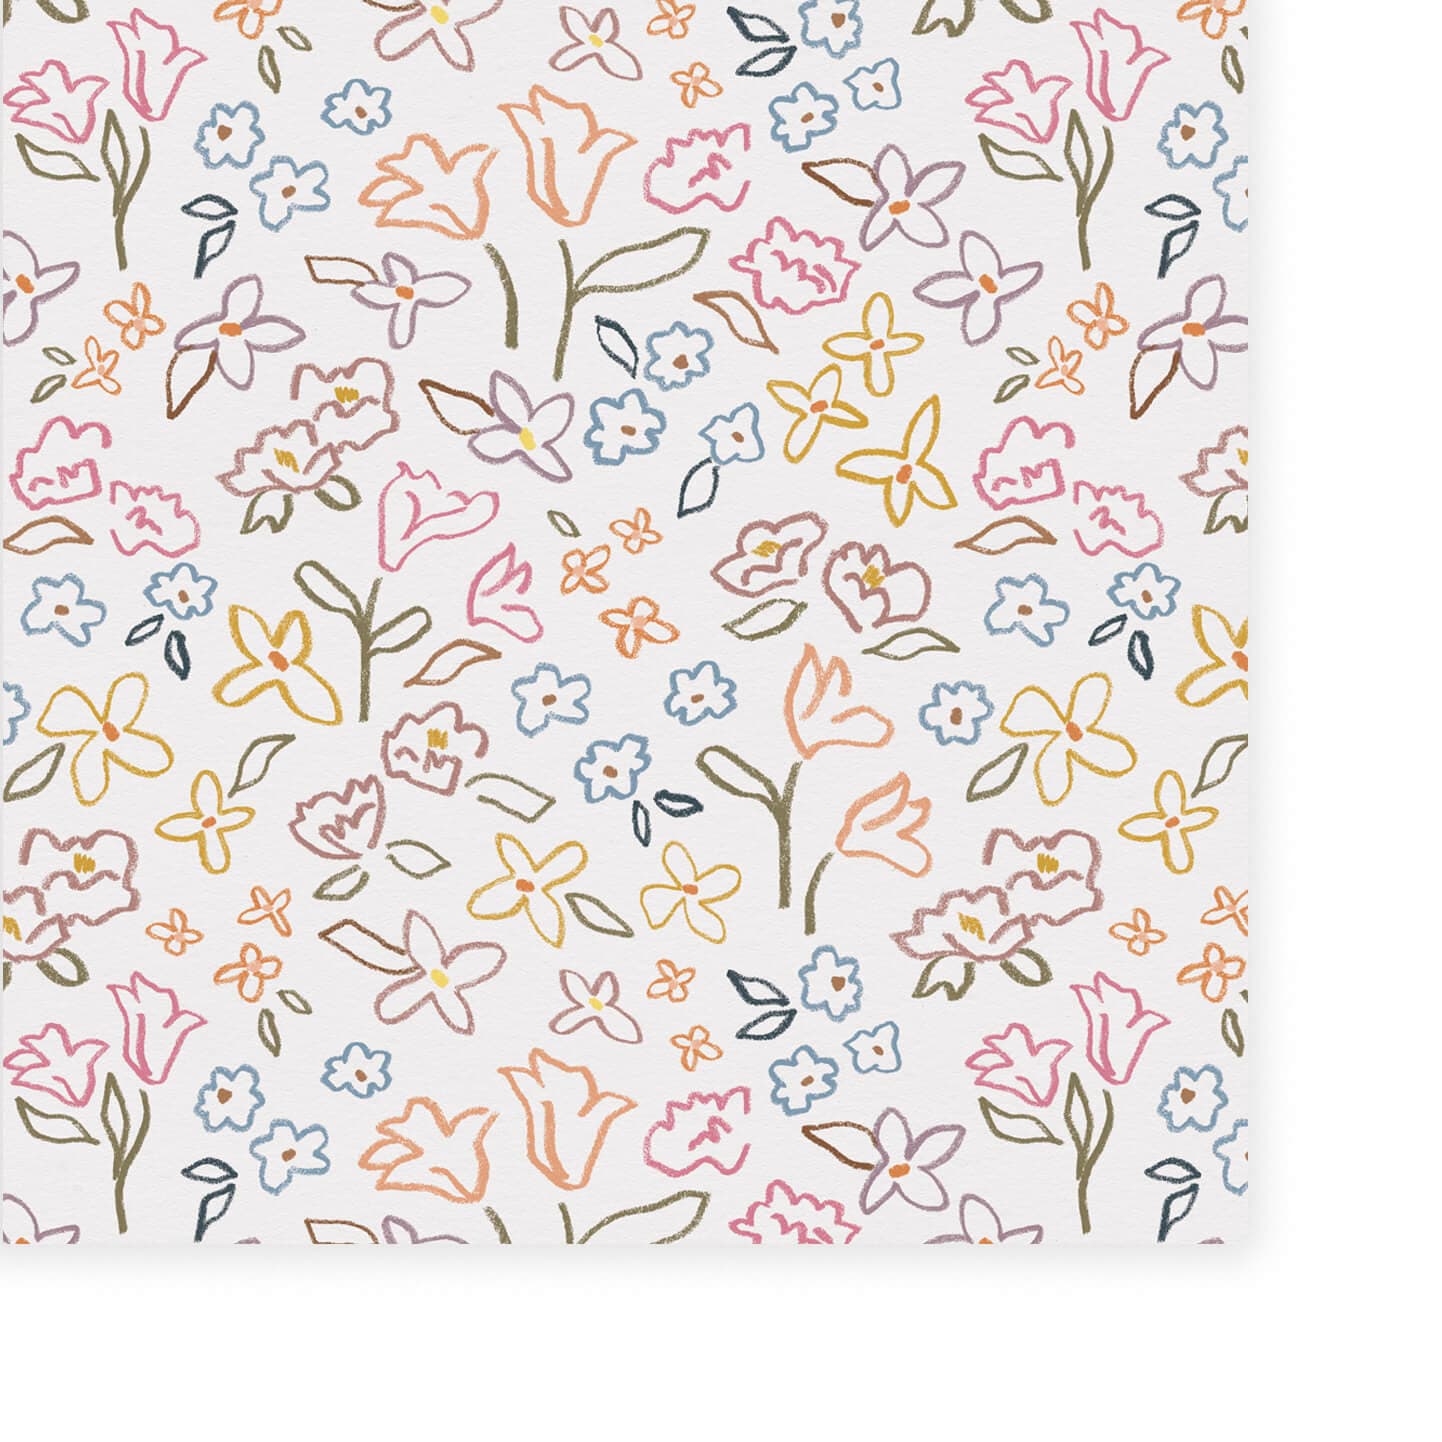 Wallpaper of flowers in coral, green, yellow, blue and pink in a crayon drawn style.